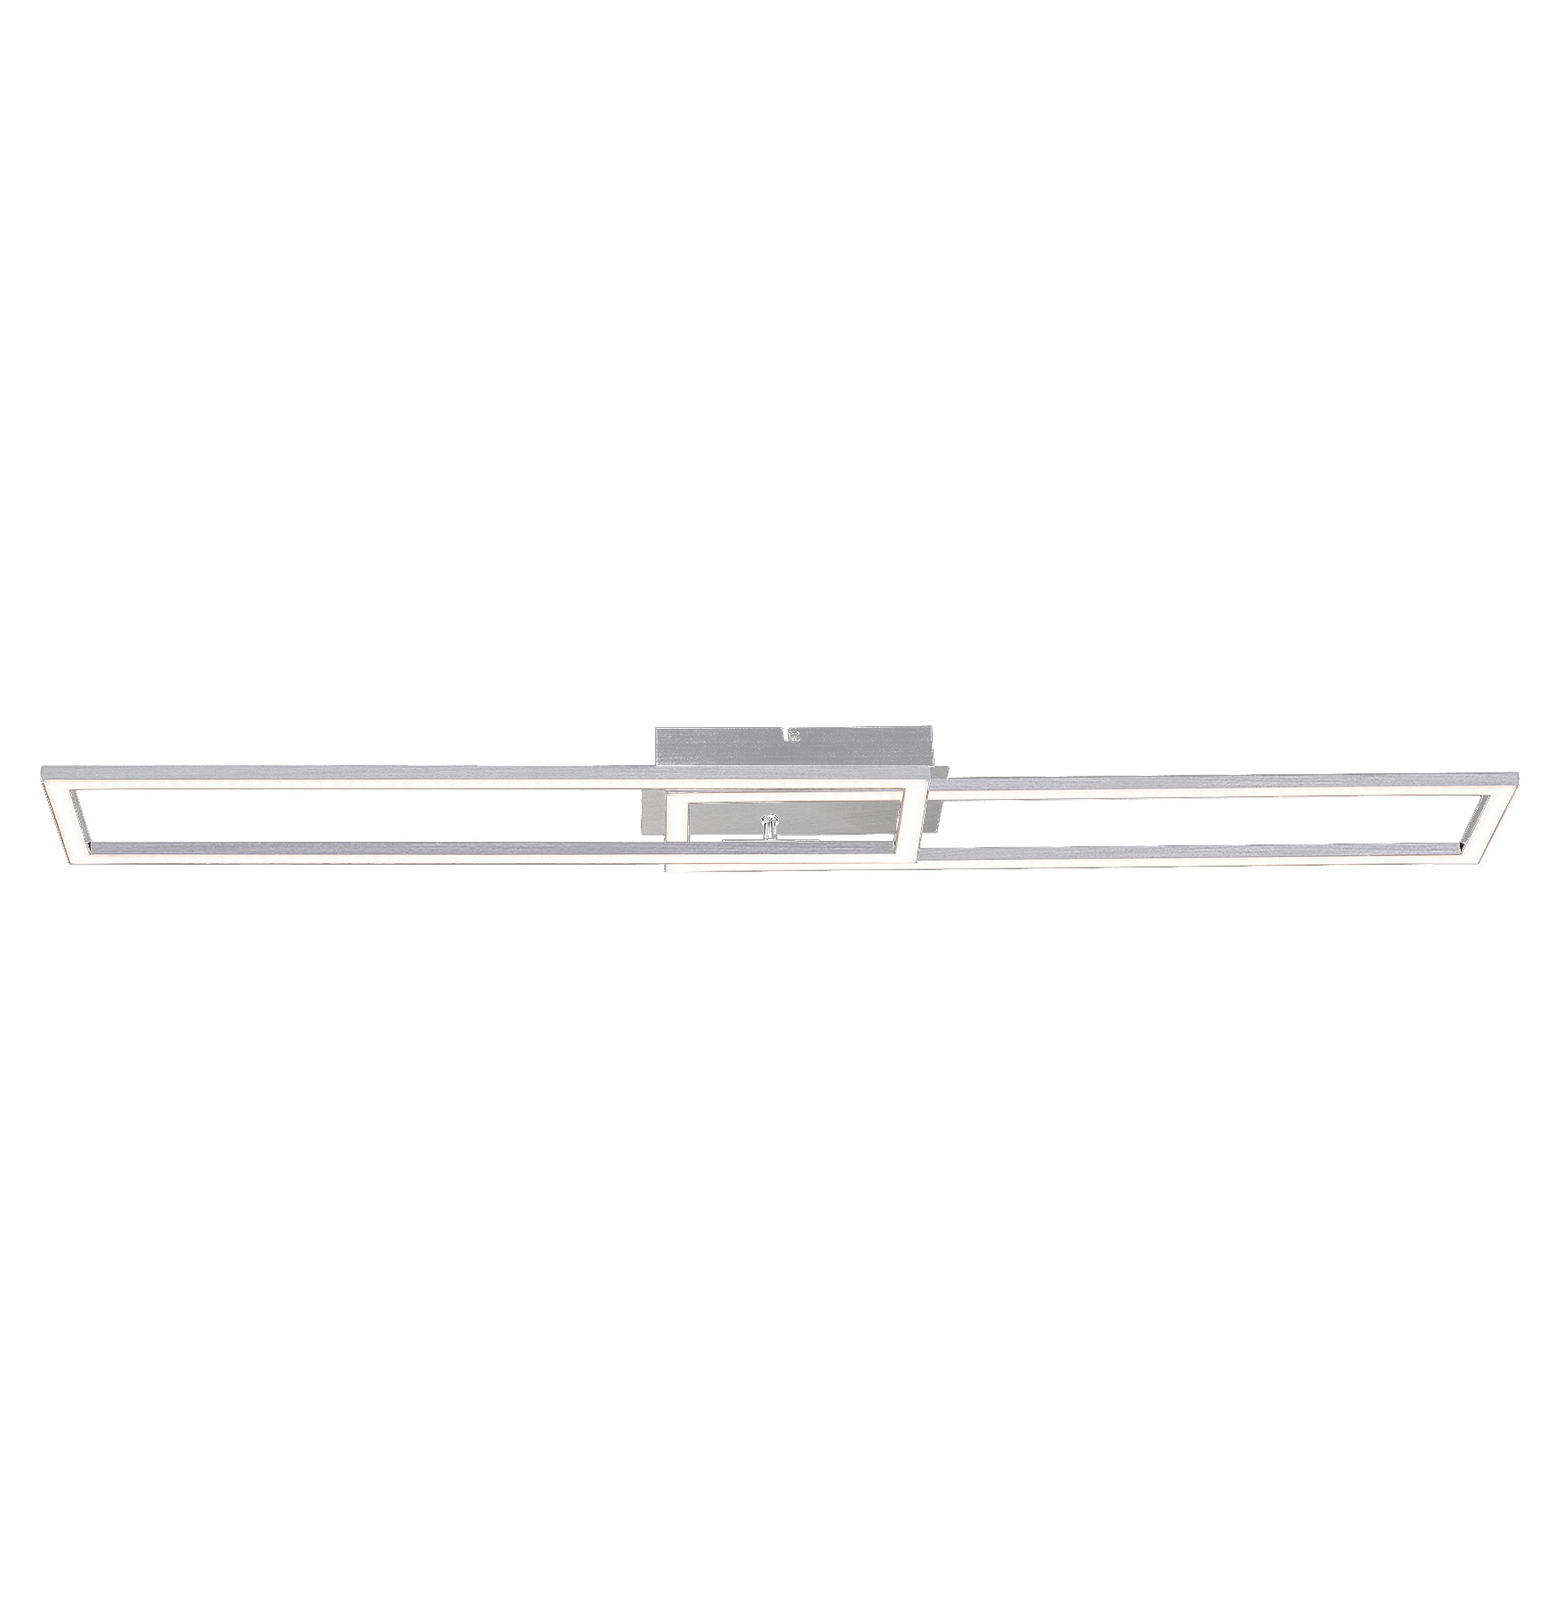 LED ceiling light Iven, steel, dimmable, 101.6x19.8cm